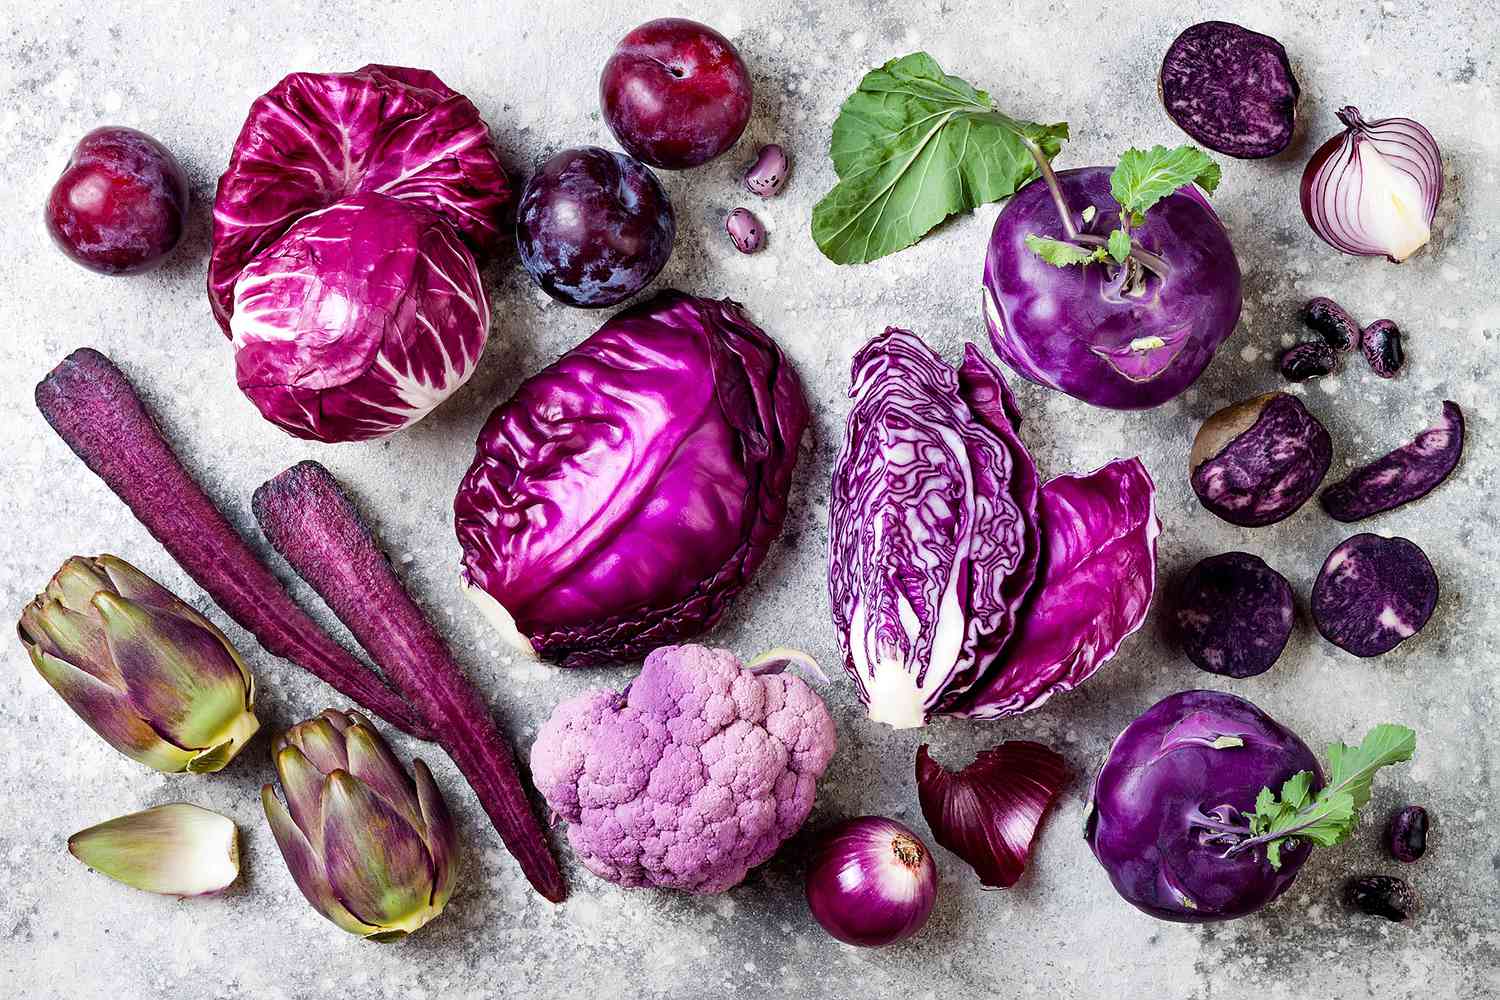 a photo of various purple fruits and vegetables